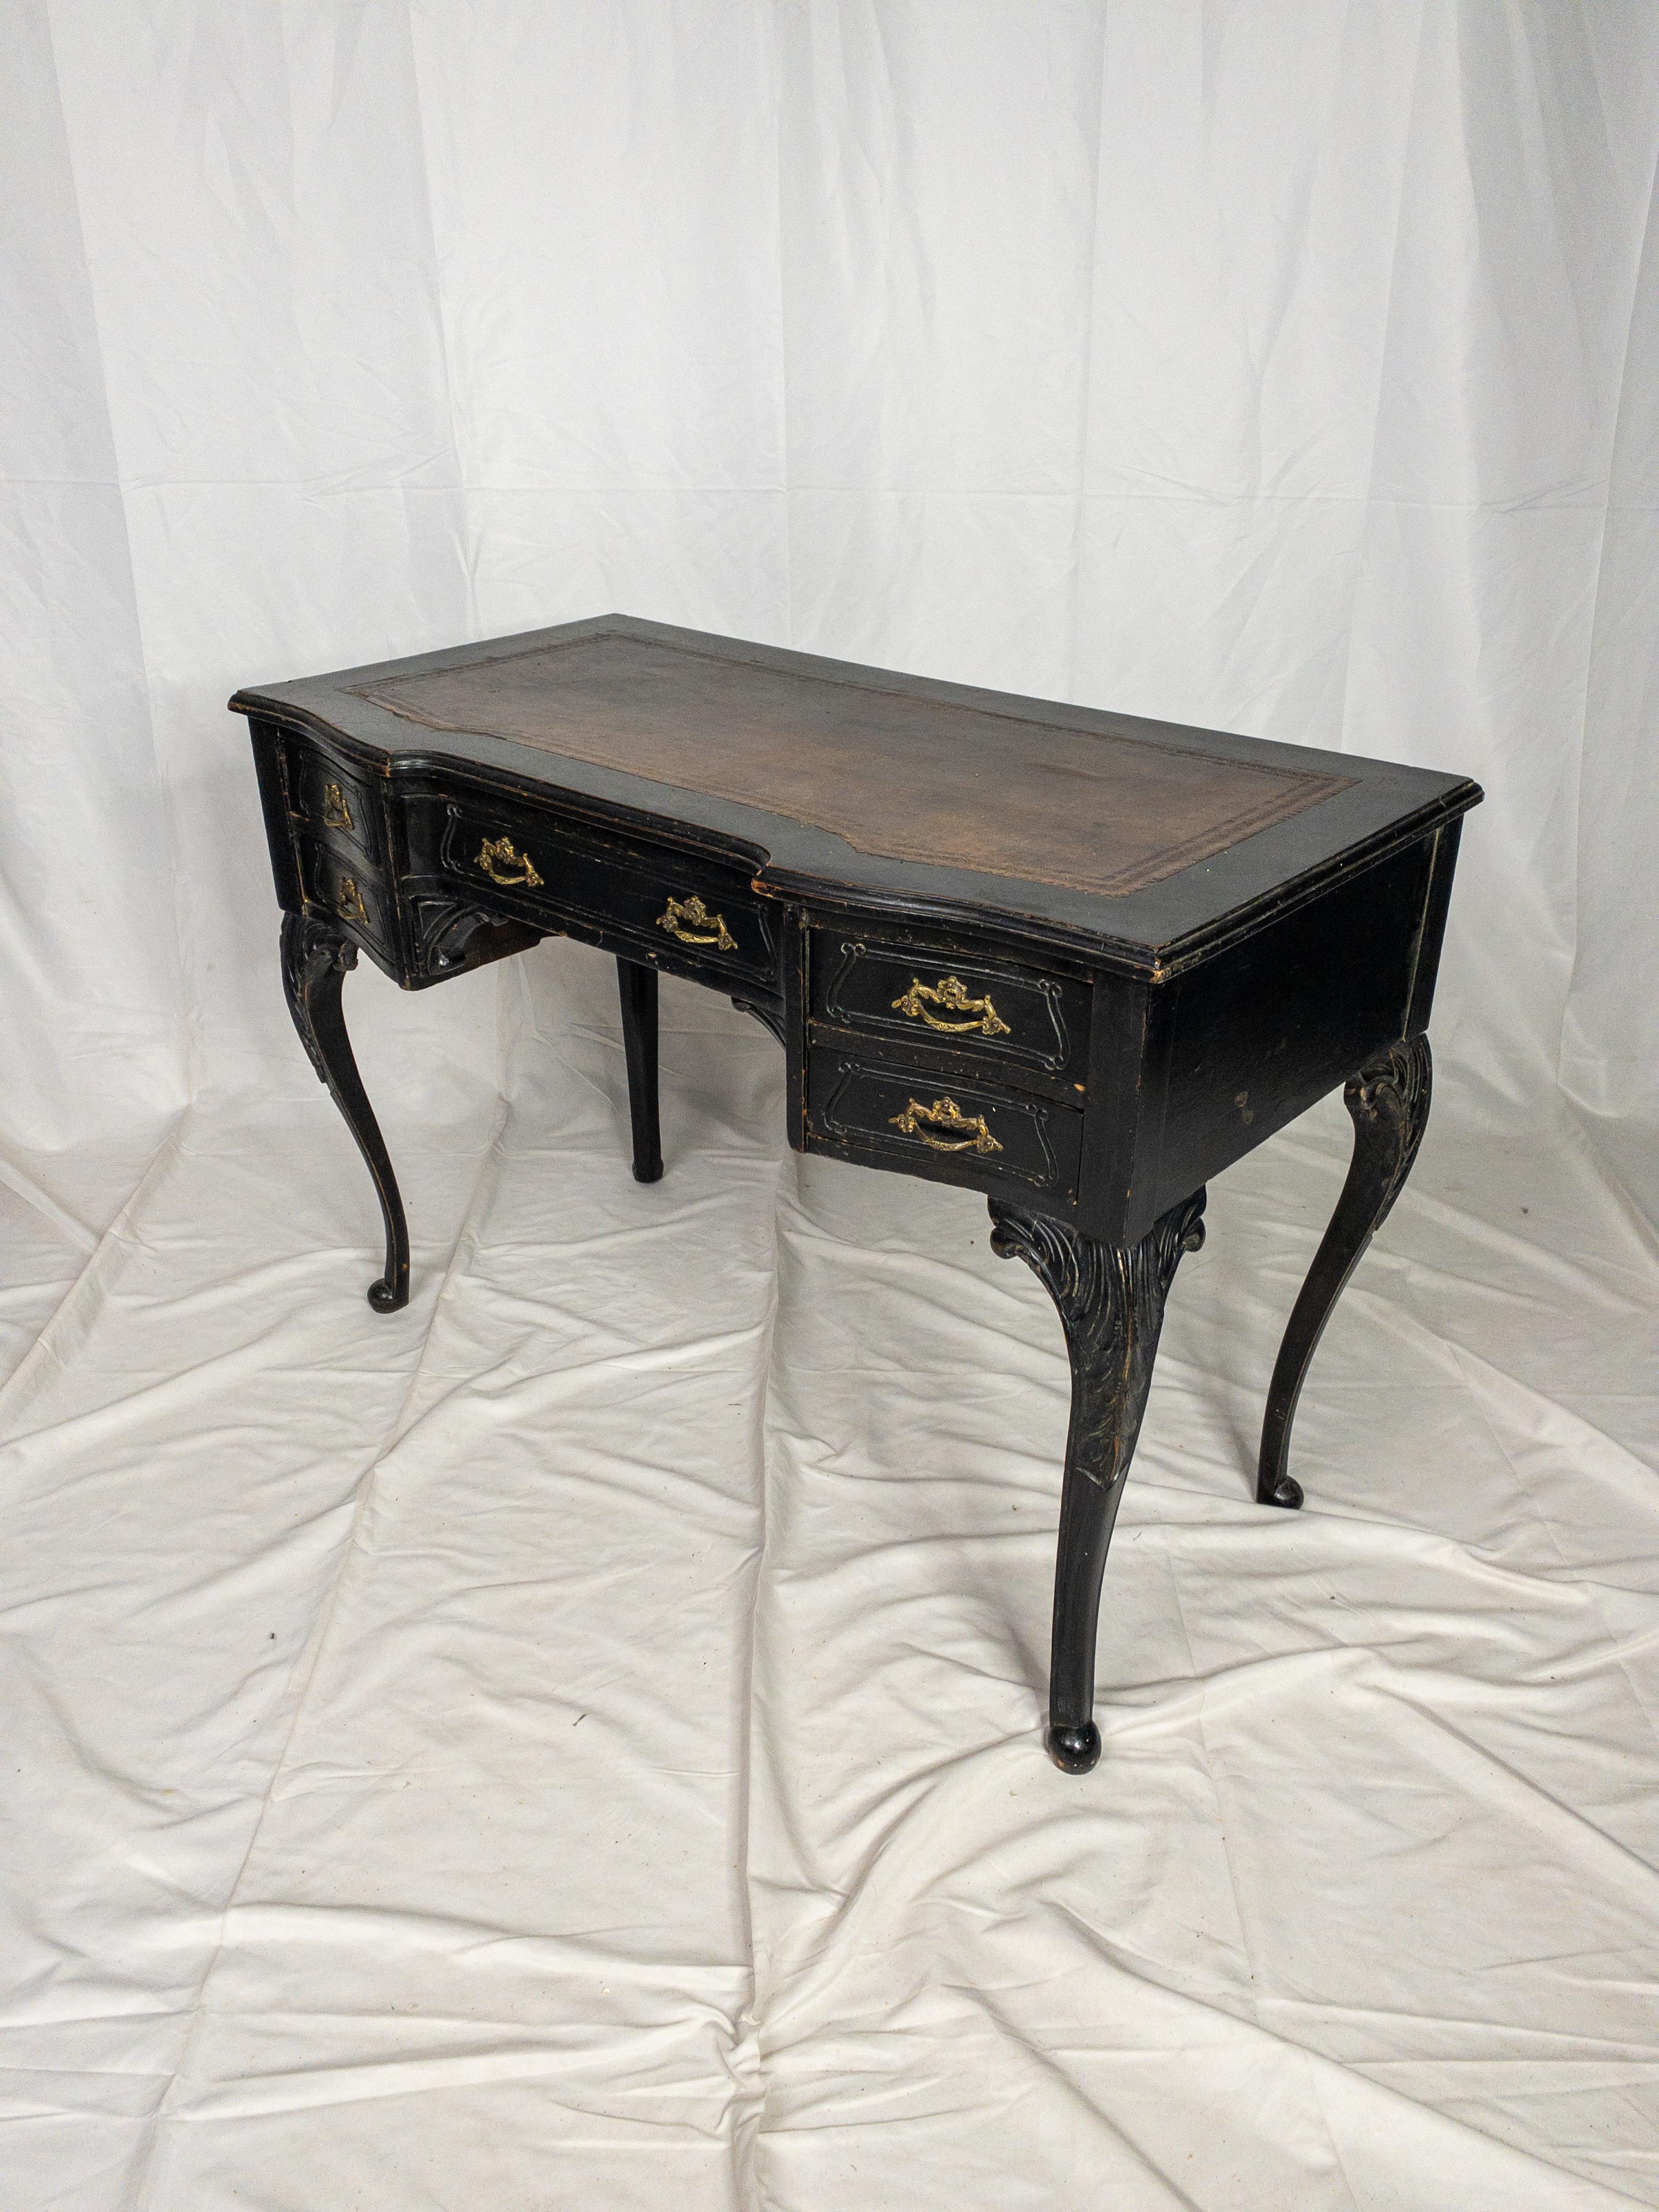 The 19th Century Louis XV Style Leather Top French Desk is a remarkable and ornate antique piece that exudes opulence and historical grandeur. Painted in a sophisticated black finish, it radiates a sense of timeless elegance, characteristic of the